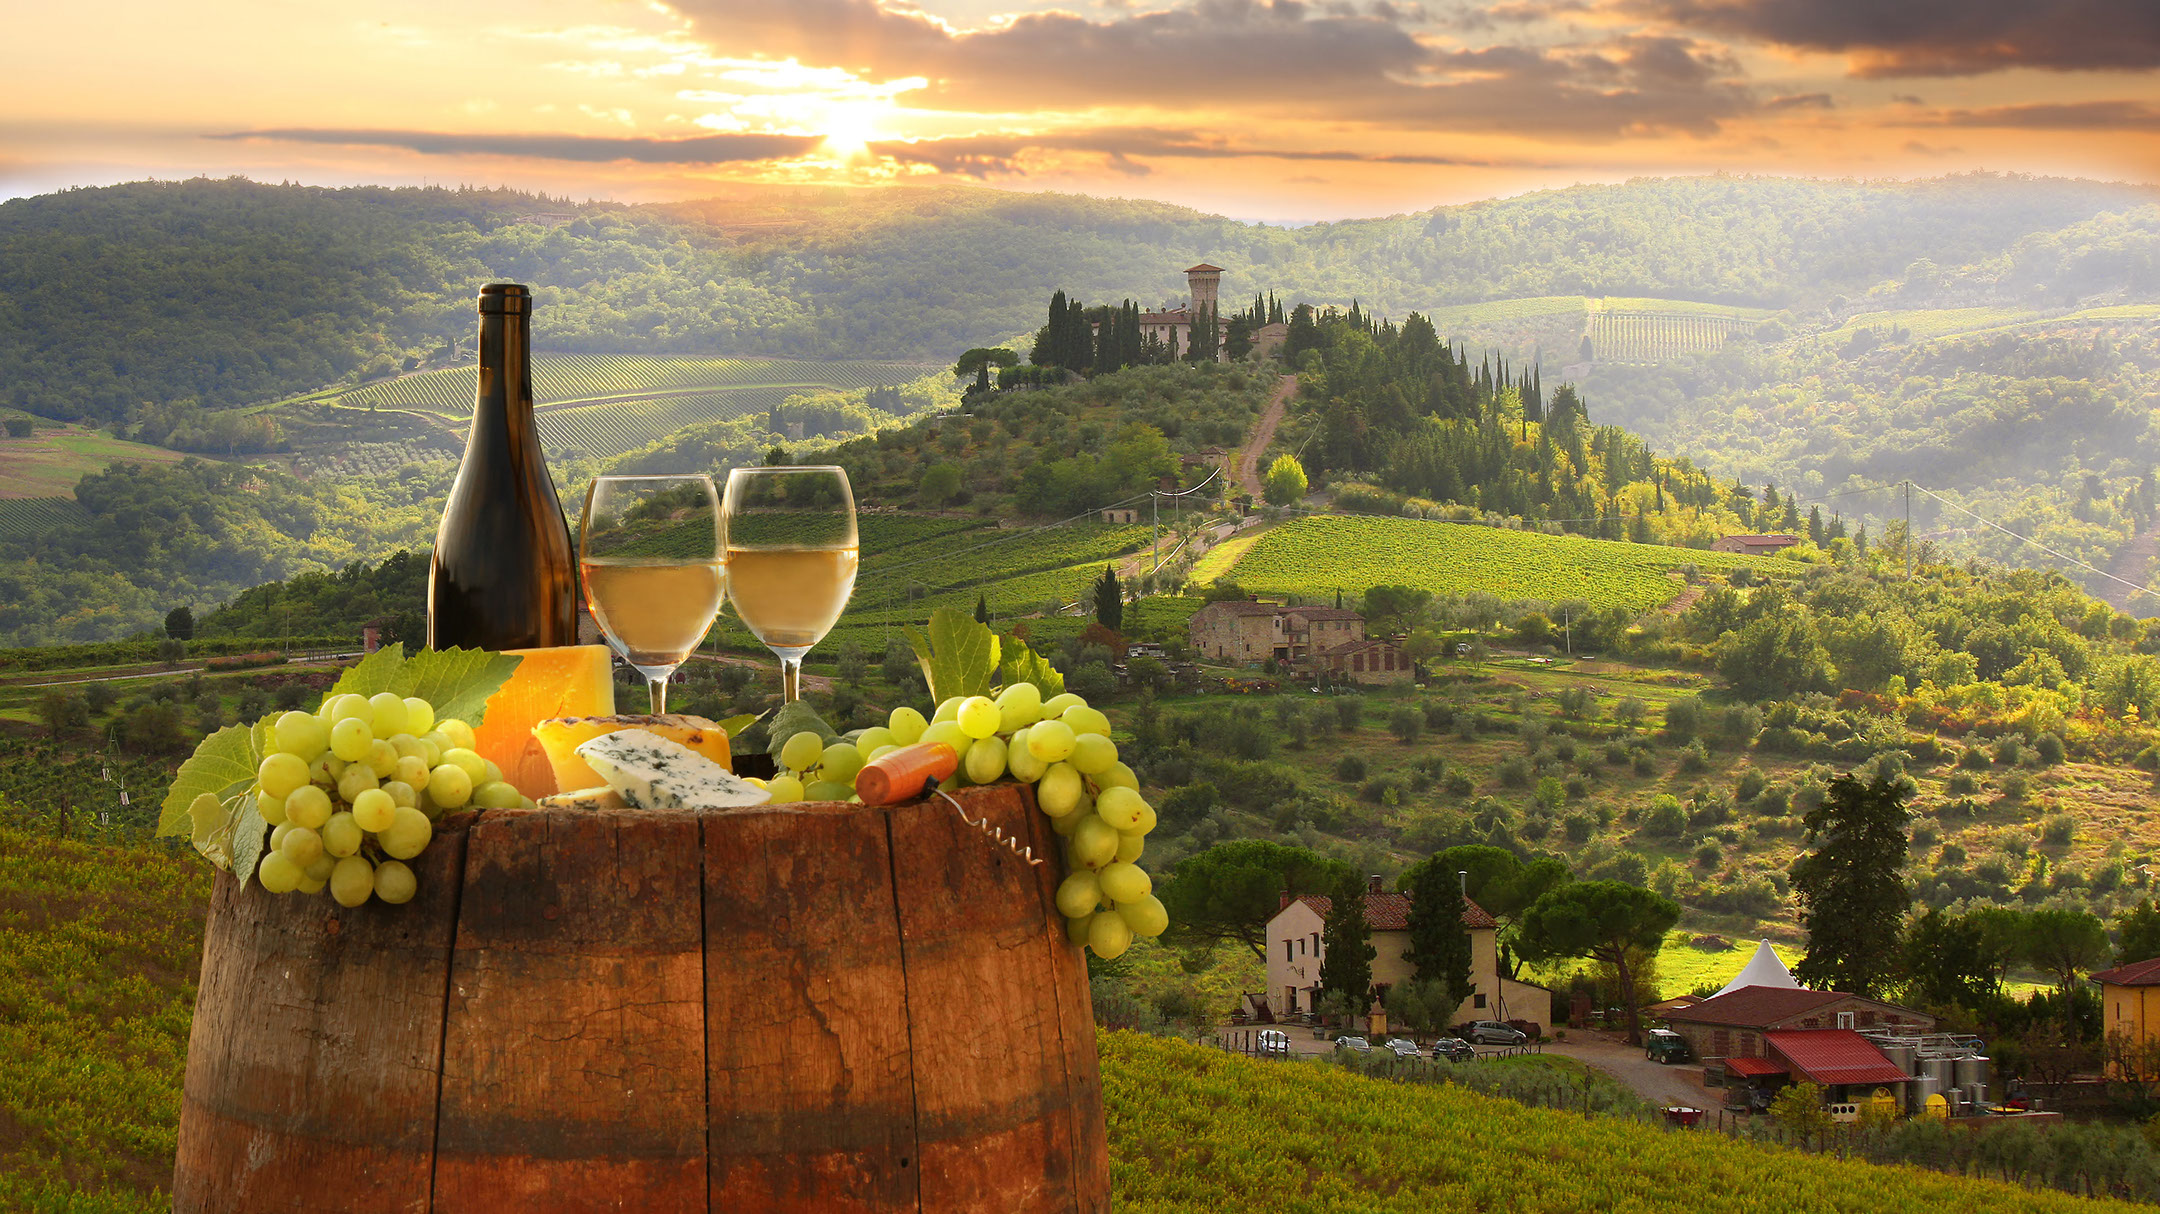 Picture of a scenic hilltop with a glass and bottle of white wine, adorned with grapes, starting off into a mountainous skyline